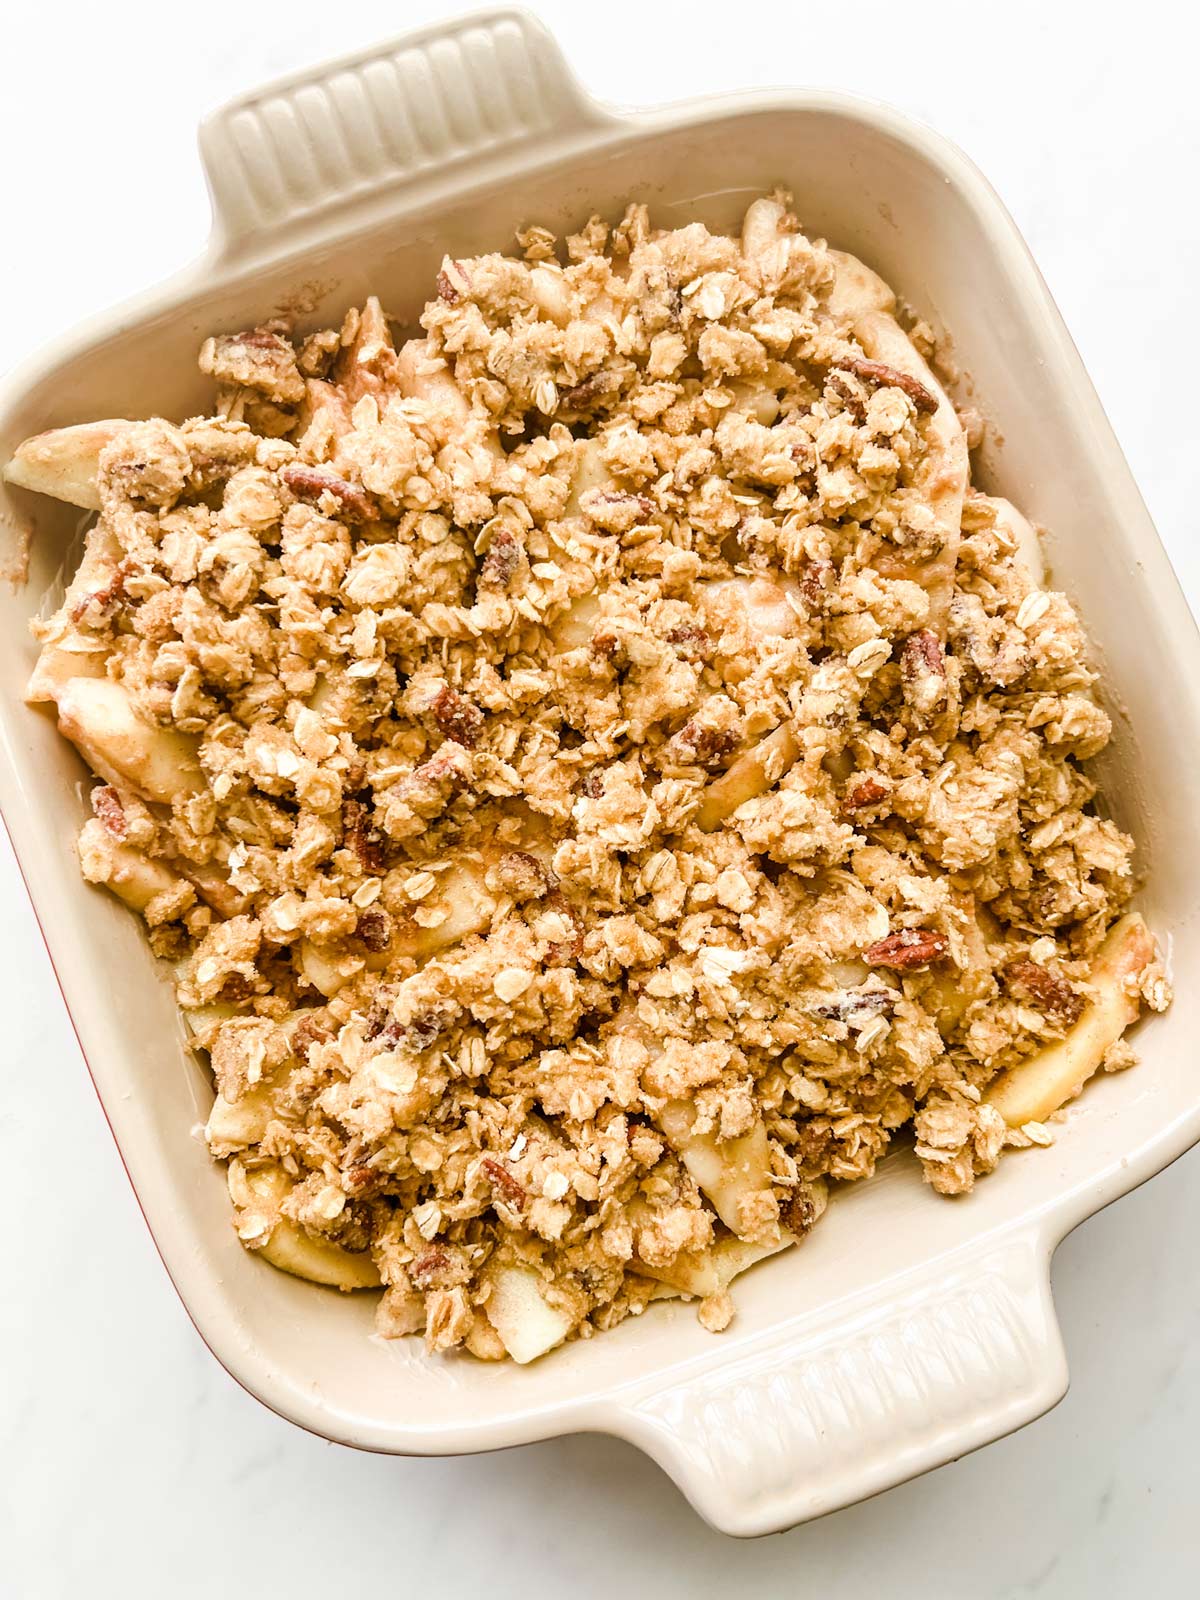 Crisp topping on top of apples and pears in a square casserole dish.